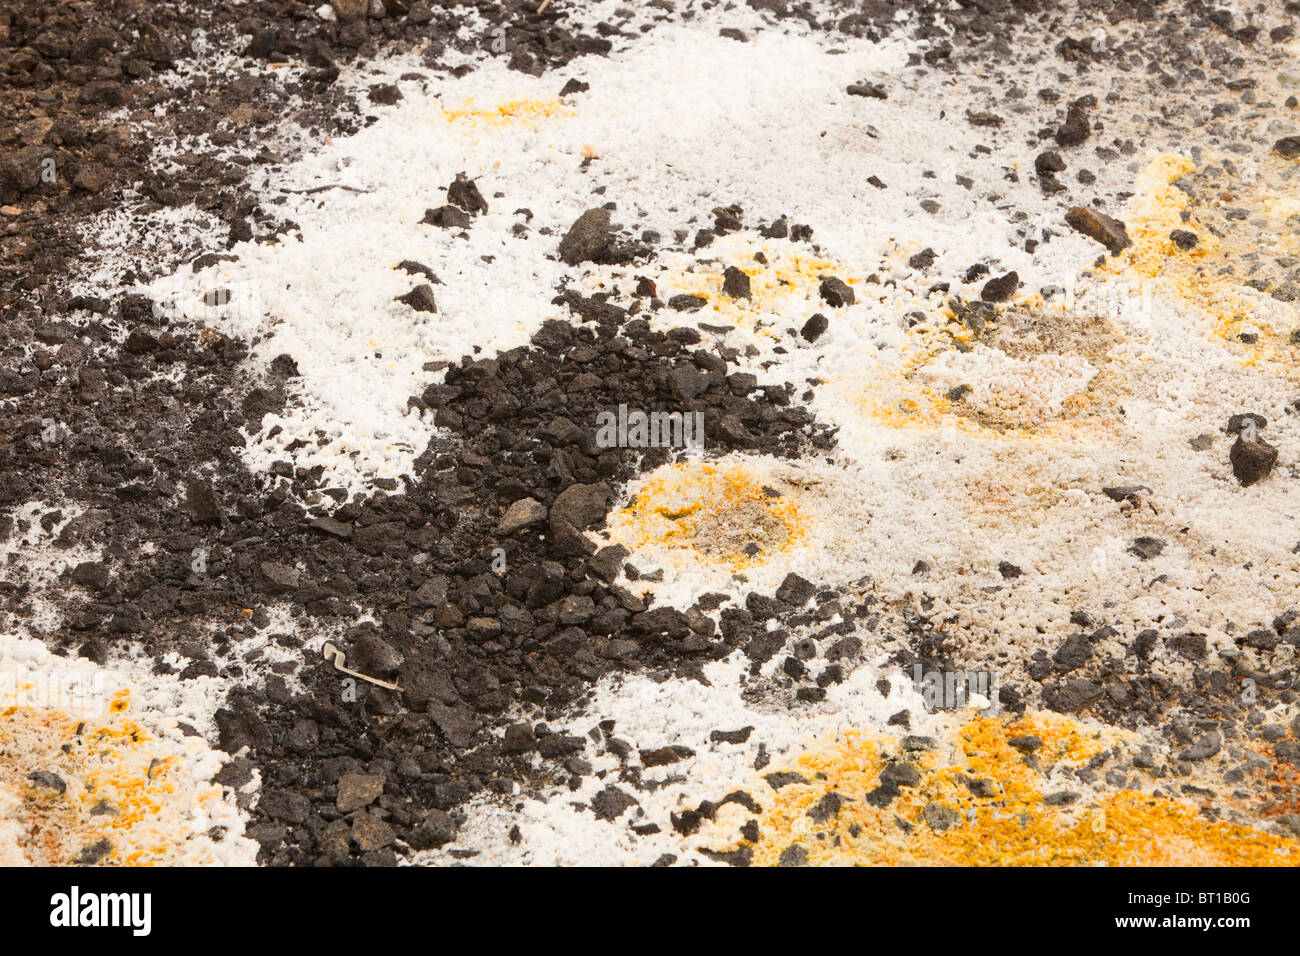 Sulpher and other minerals on hot ground in a geothermal area of Icleand at Keflavik. Stock Photo